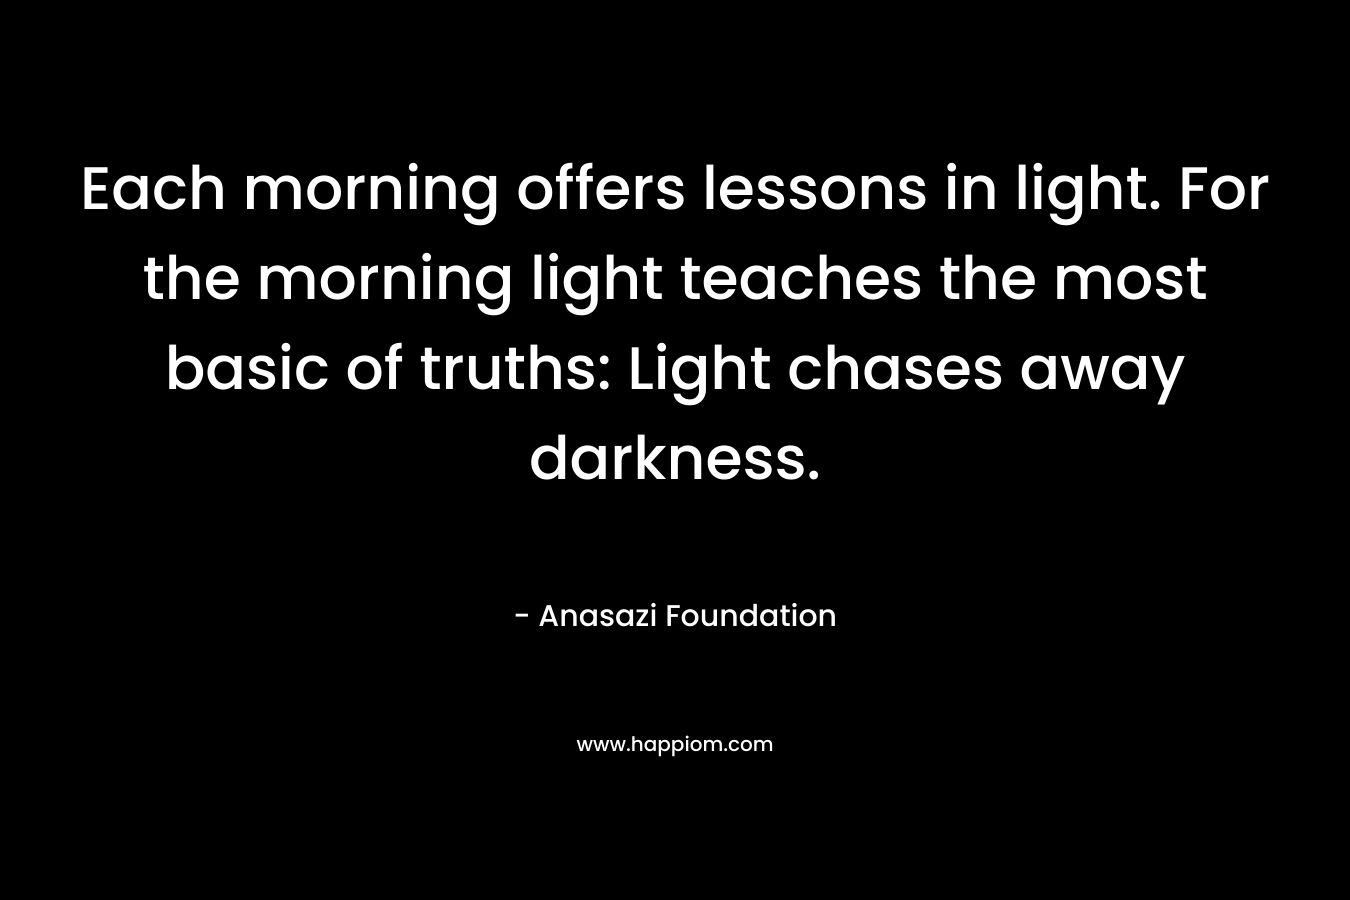 Each morning offers lessons in light. For the morning light teaches the most basic of truths: Light chases away darkness.